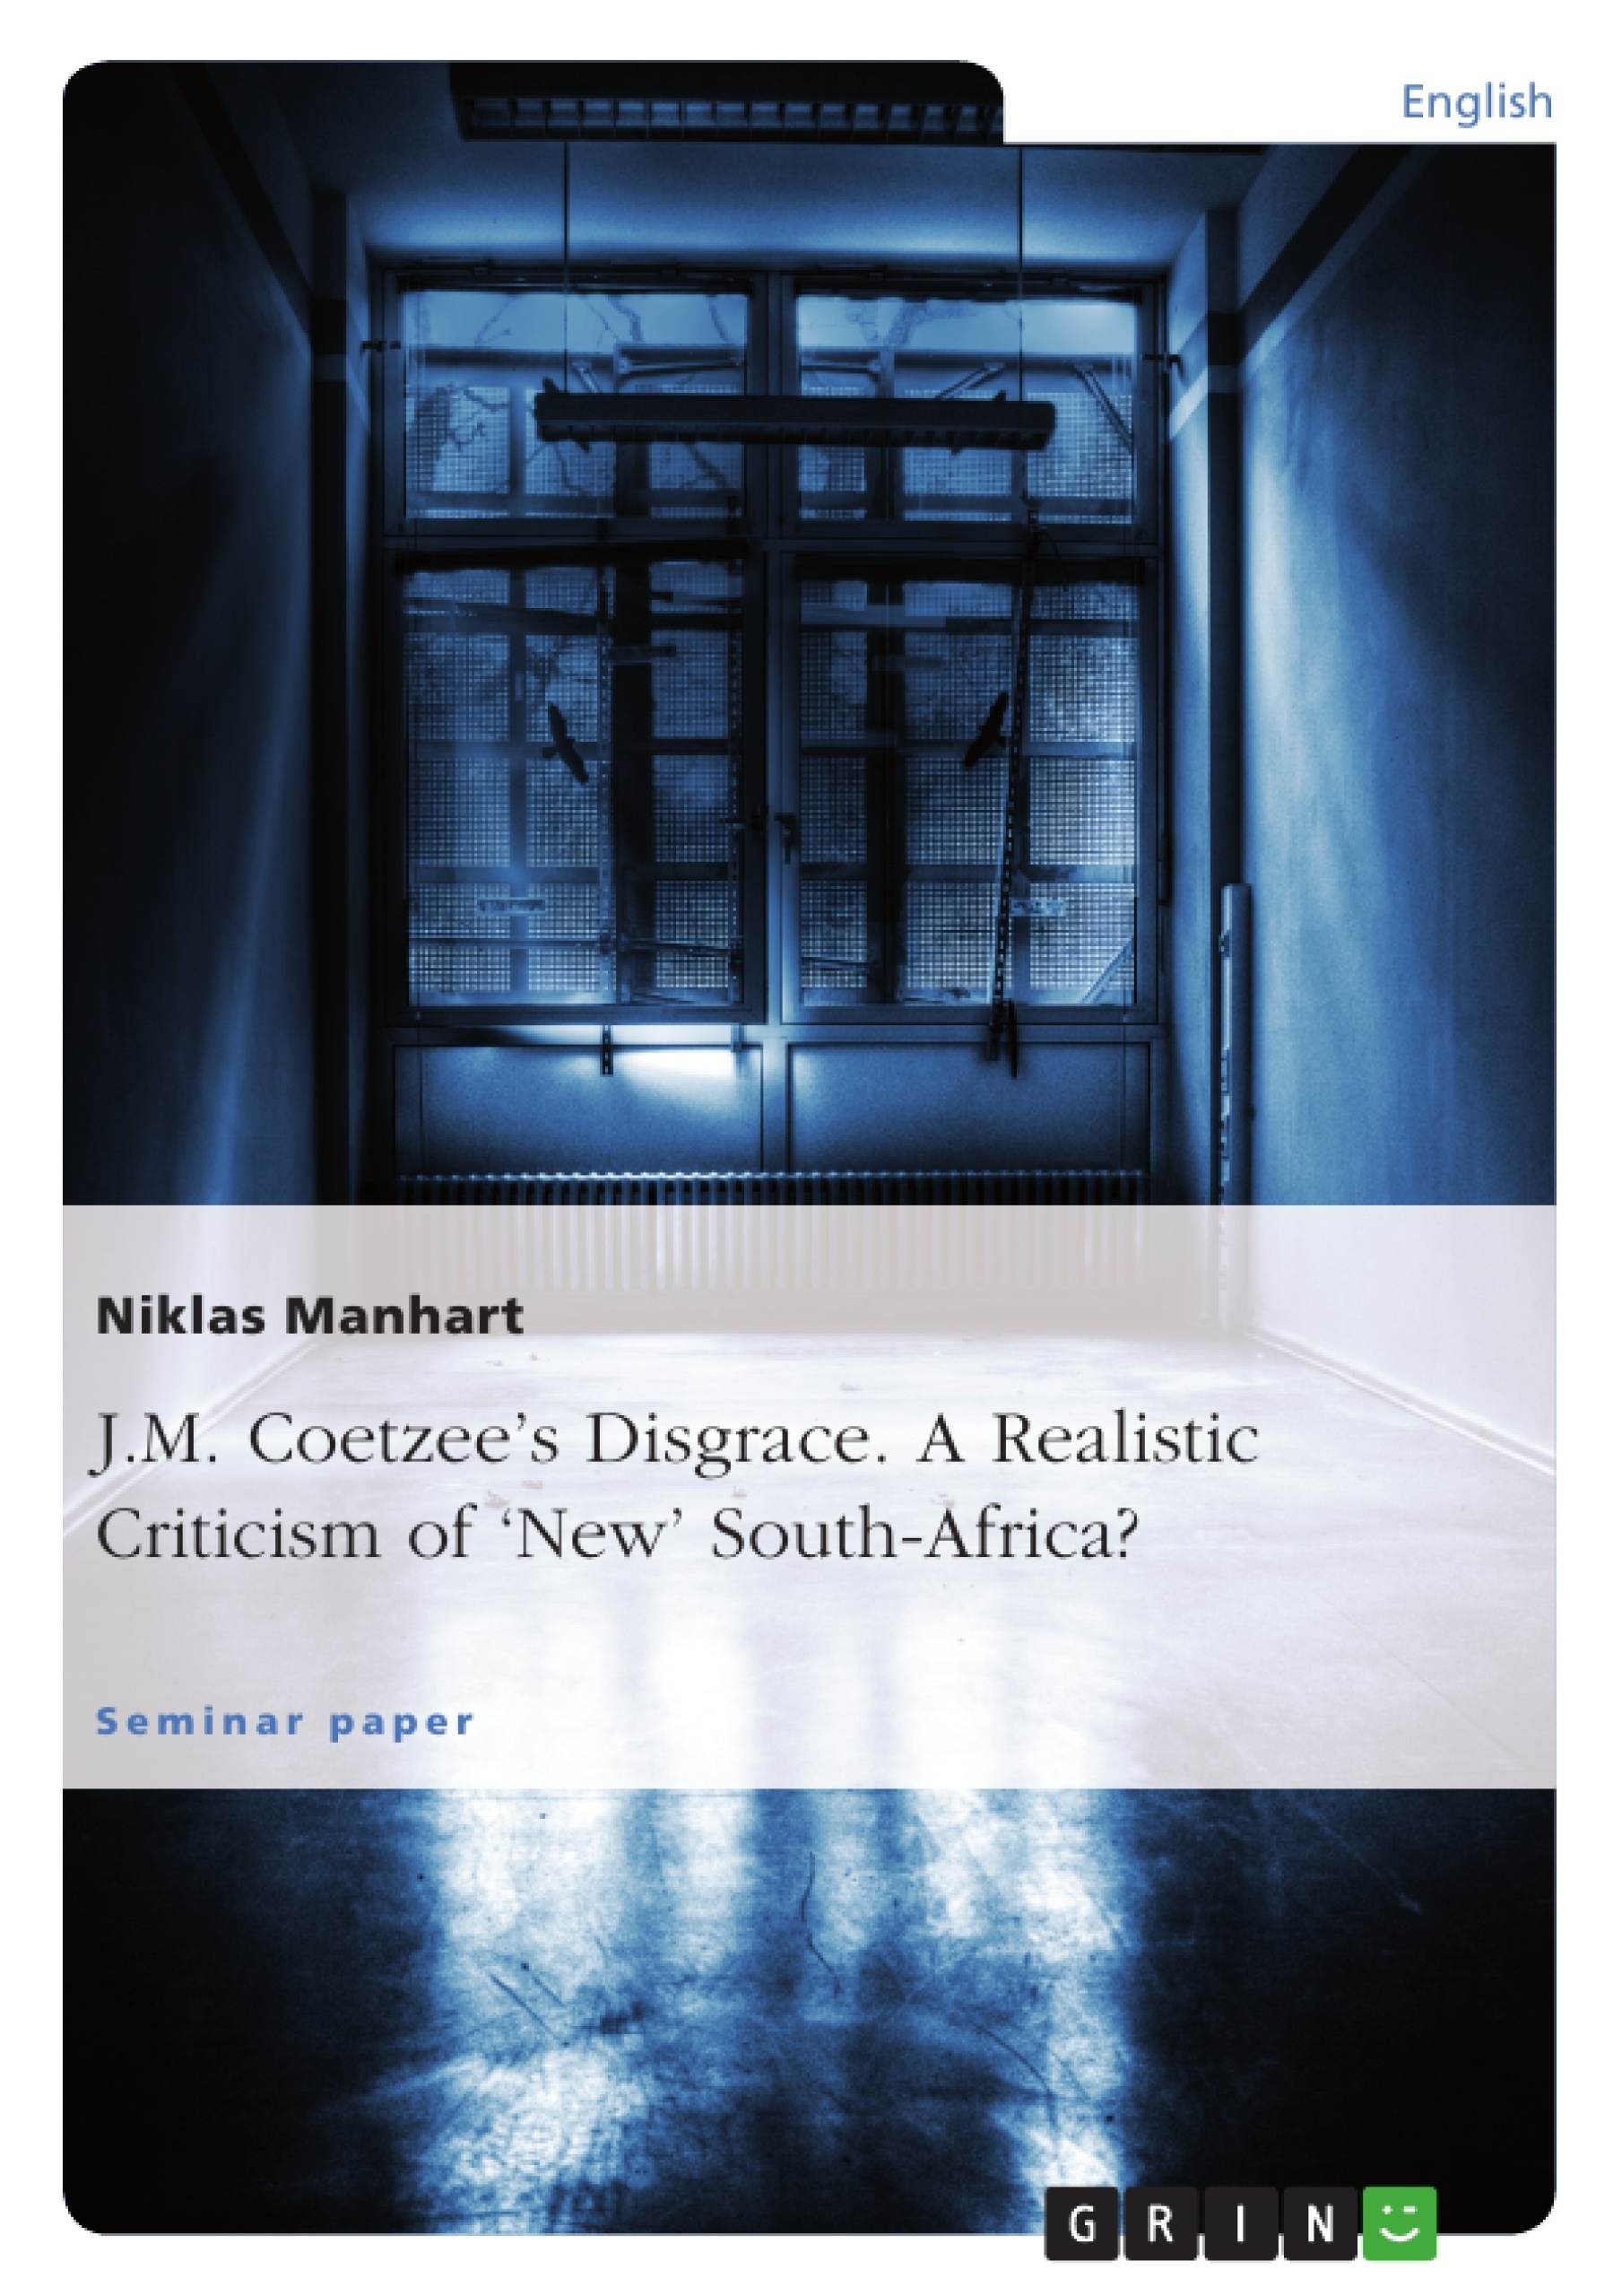 Titre: J.M. Coetzee’s Disgrace. A Realistic Criticism of ‘New’ South-Africa?